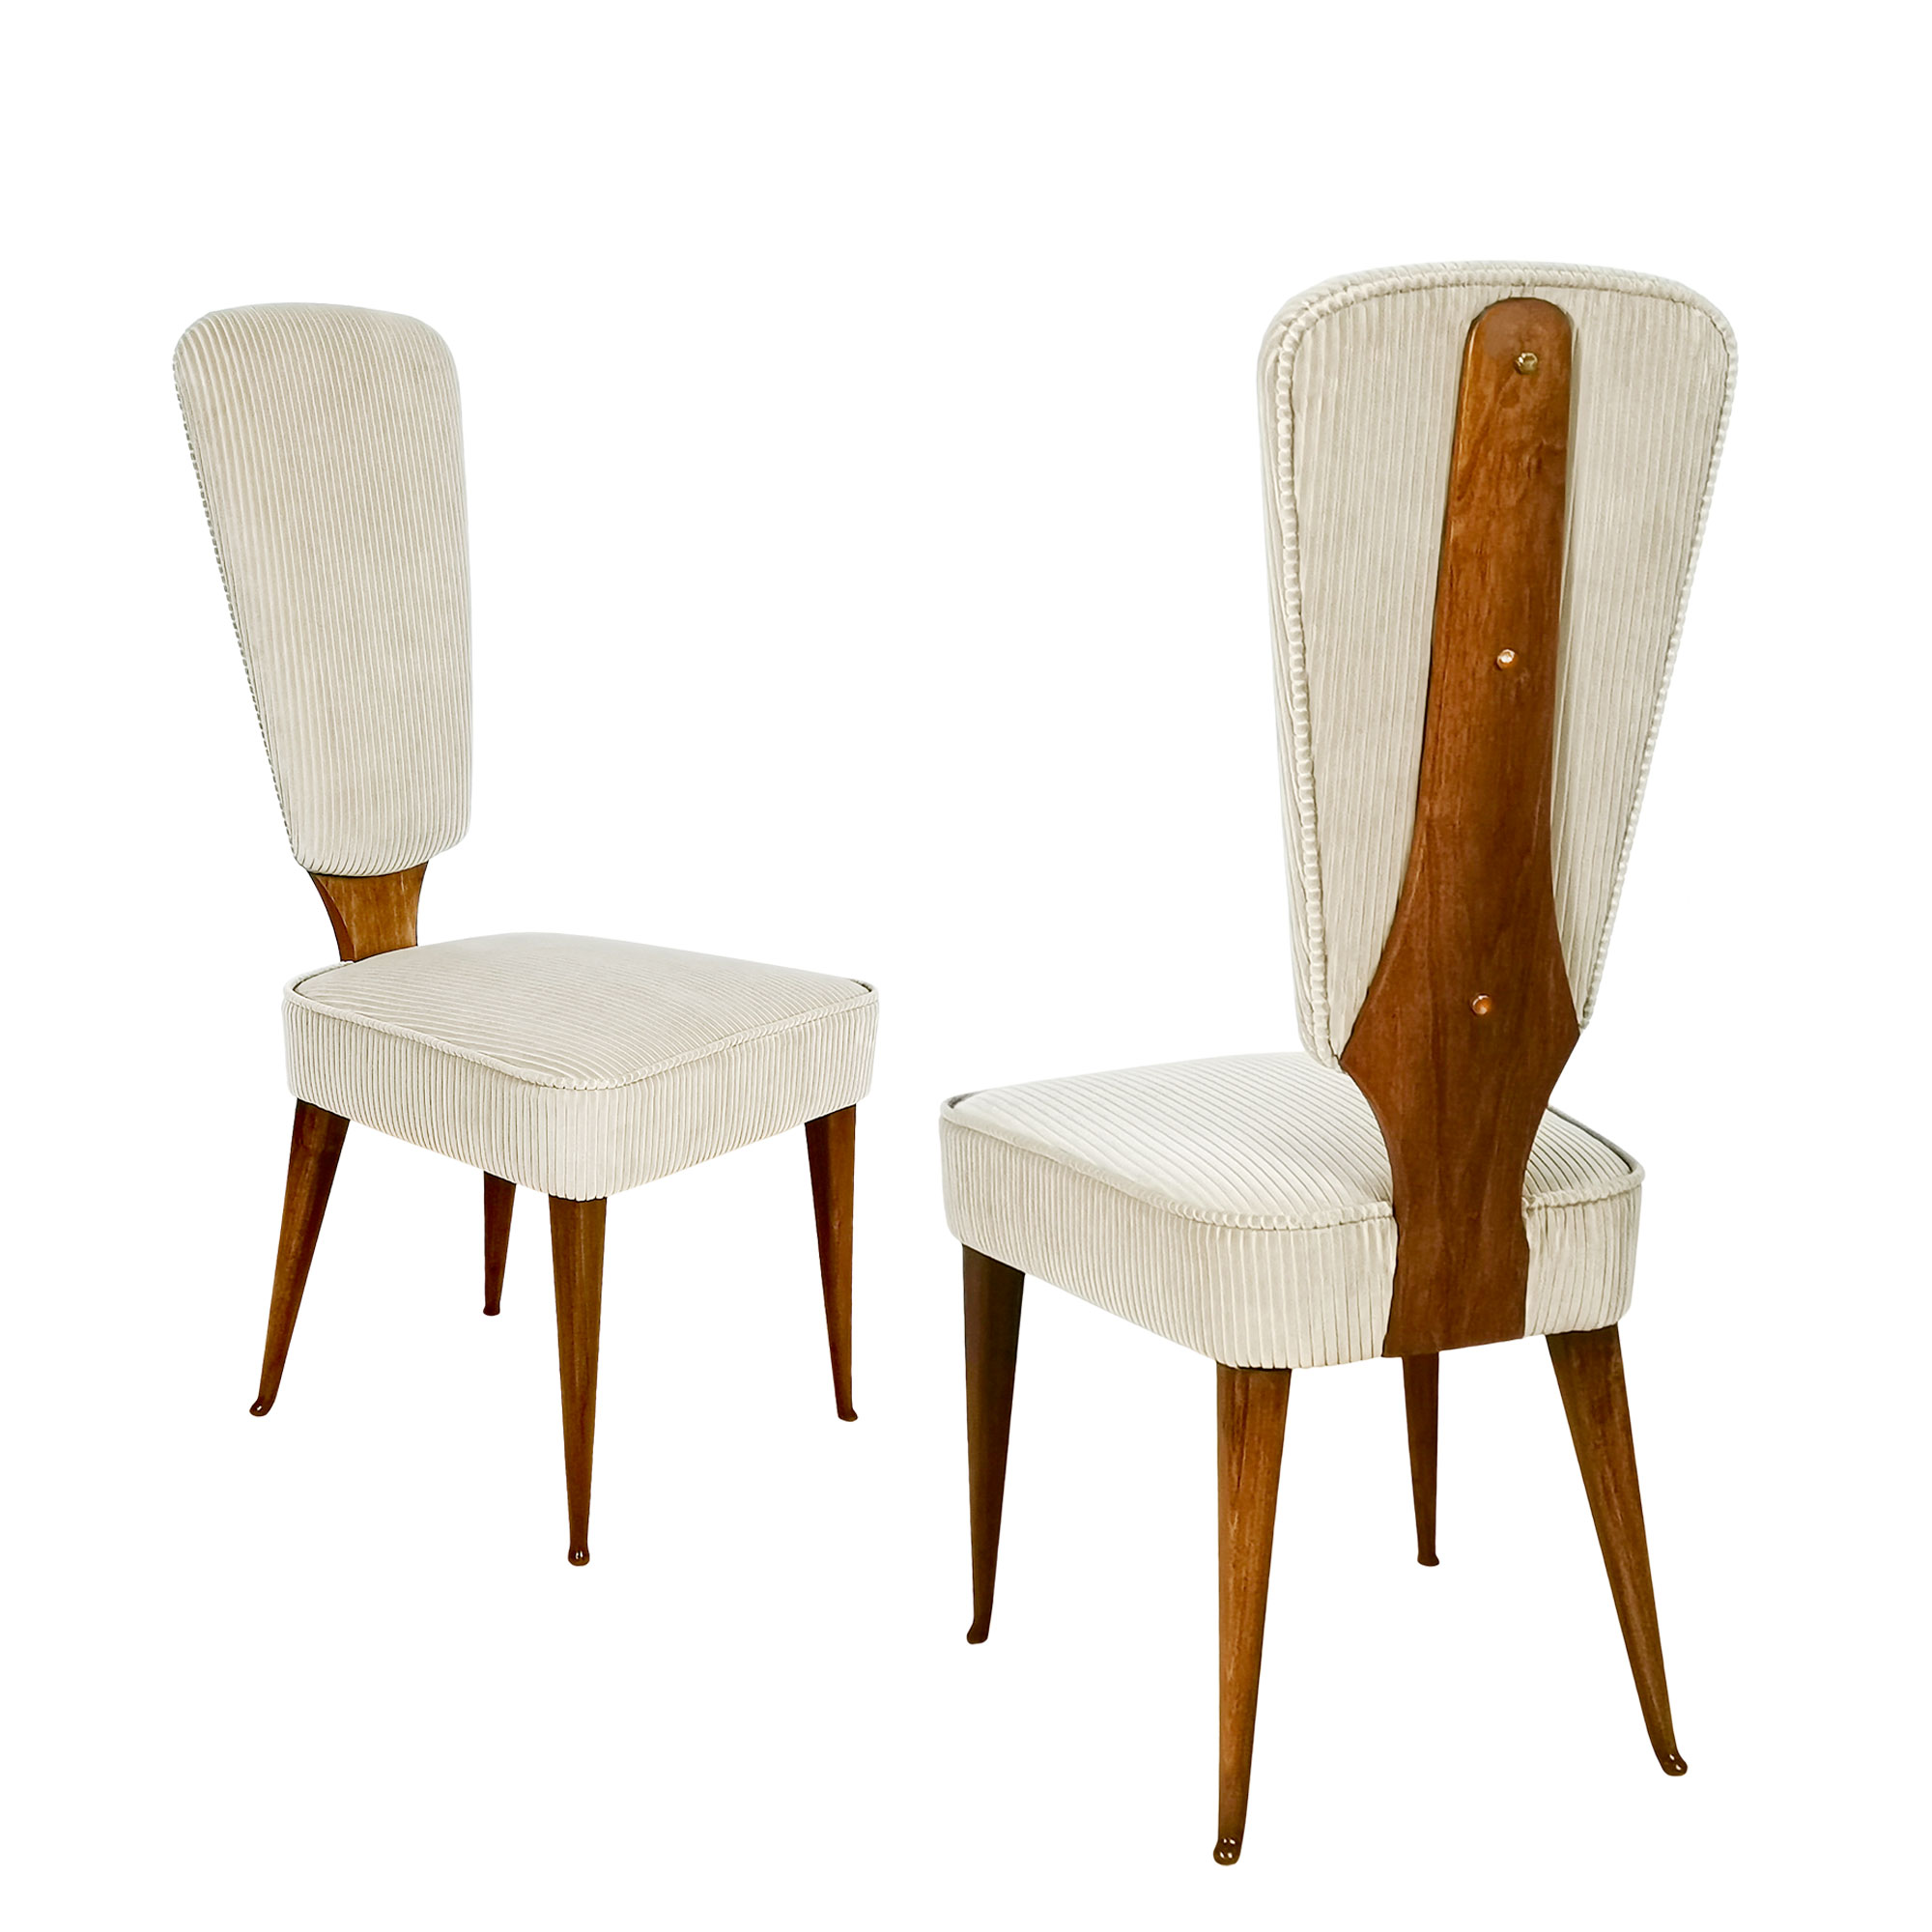 Pair of chairs with high backrests – Italy 1940